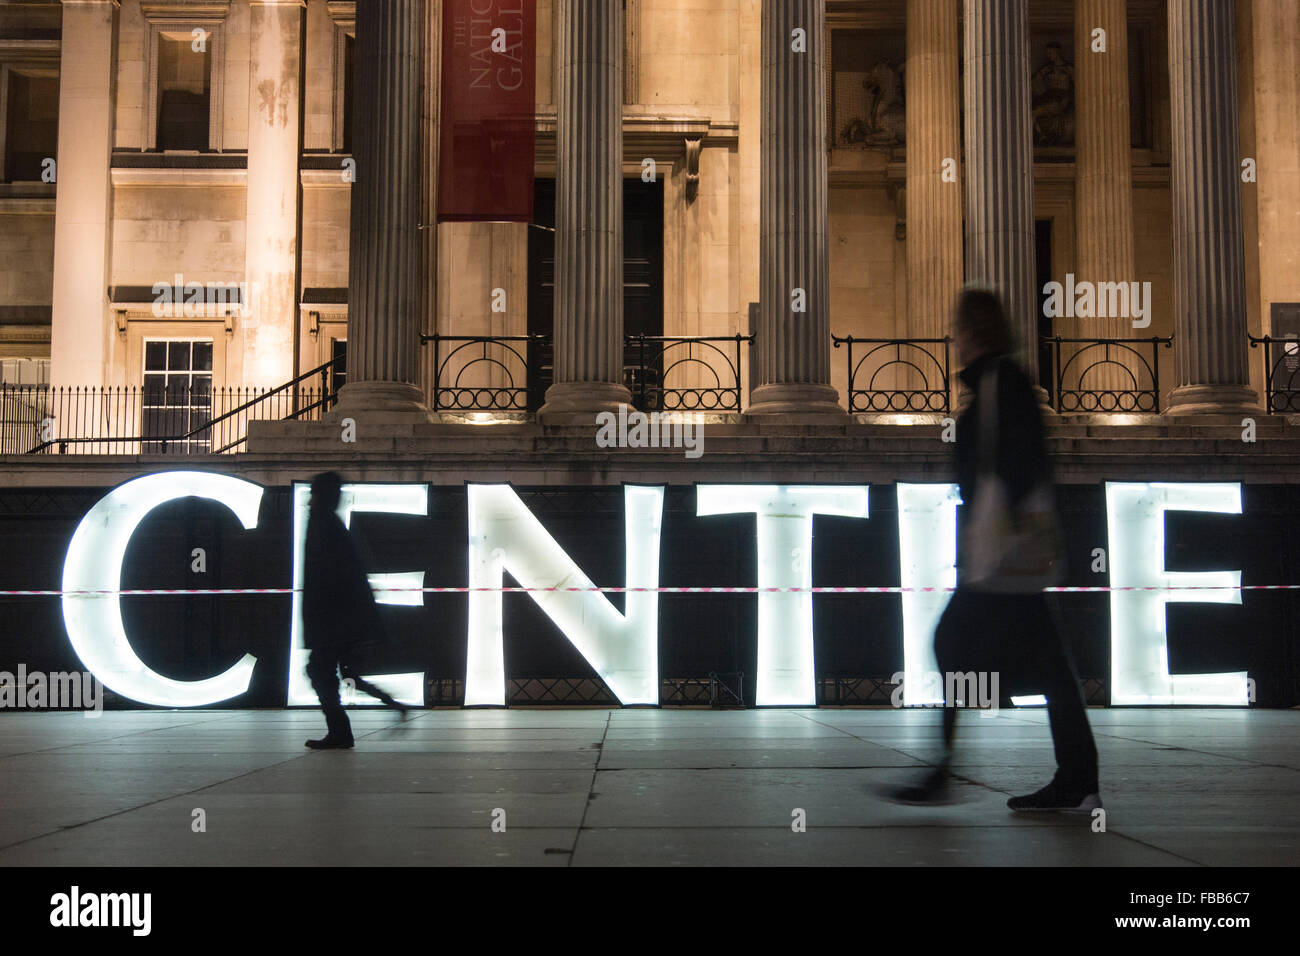 London, UK. 13 January 2016. The giant neon letters from the Centrepoint building are lit up in Trafalgar Square. Developed by creative producers Artichoke and supported by the Mayor of London, Lumiere London runs from 14th-17th January 2016, 6.30-10.30pm. Free to attend, the festival will re-imagine London’s urban landscape and architecture in 30 artworks across four main areas: King’s Cross; Mayfair and Grosvenor Square; Piccadilly, Regent Street, Leicester Square and St James’s; and Trafalgar Square and Westminster. Credit:  Nick Savage/Alamy Live News Stock Photo